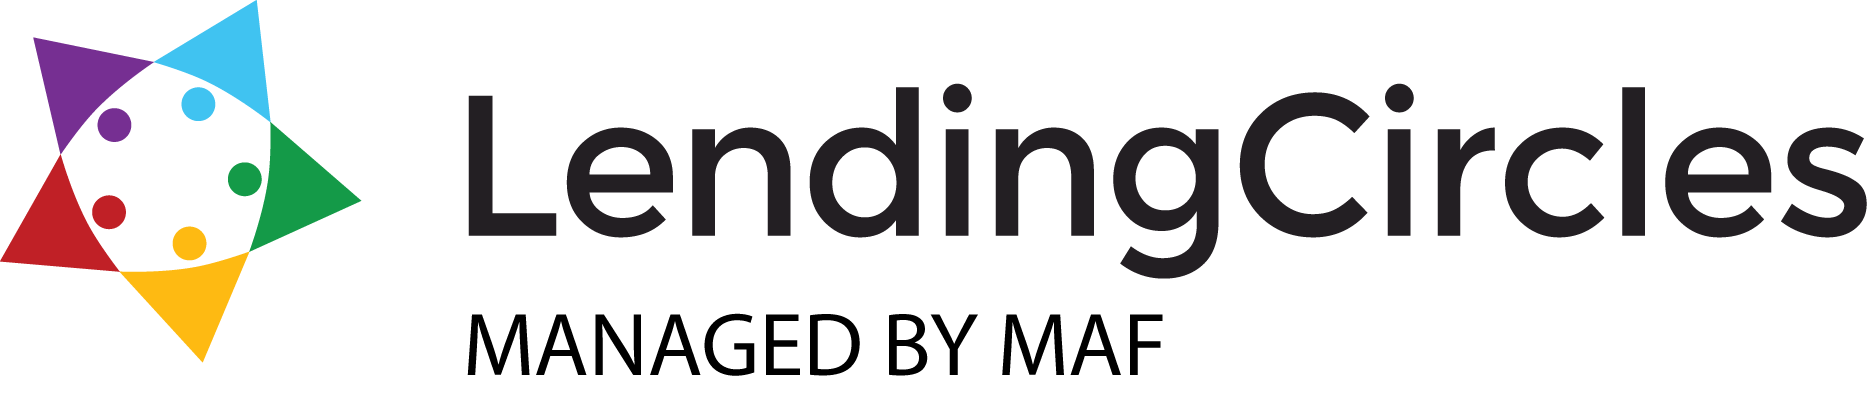 Lending Circles managed by Mission Asset Fund